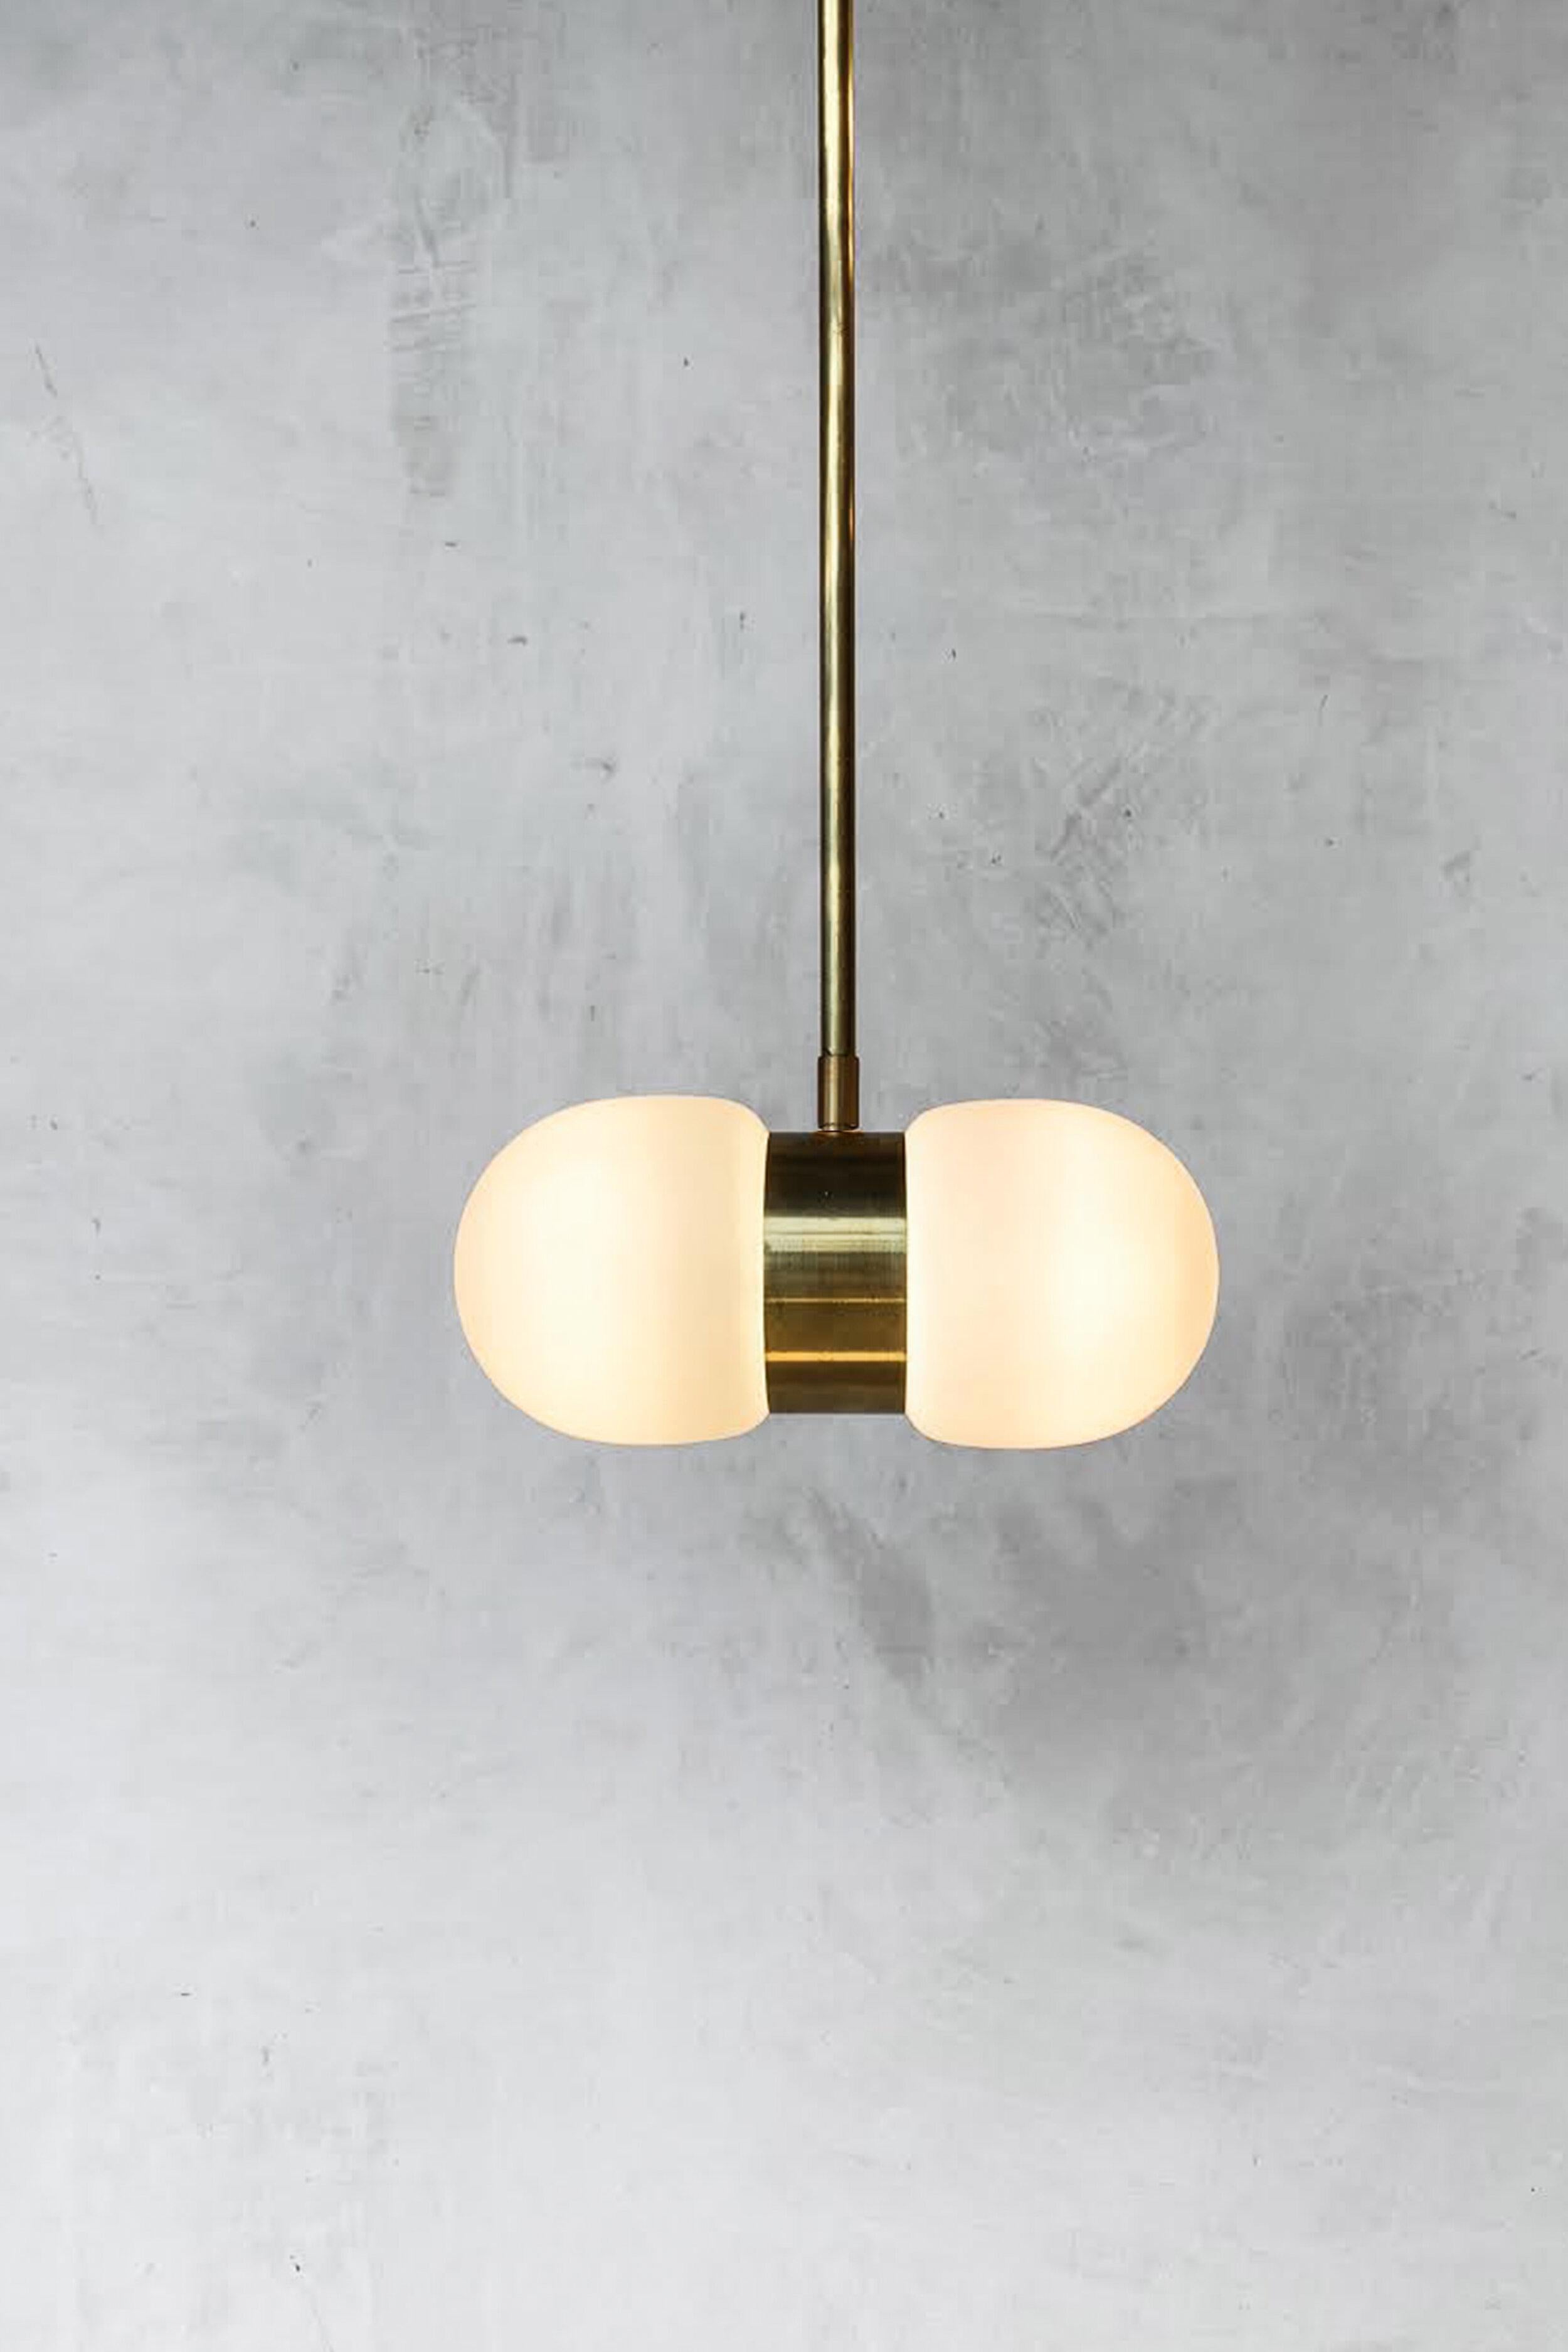 Nuvol double long pendant by Contain
Dimensions: D21.5 x W50 x H10cm 
Materials: brass structure and matte or glossy glass.
Available in different finishes. 

All our lamps can be wired according to each country. If sold to the USA it will be